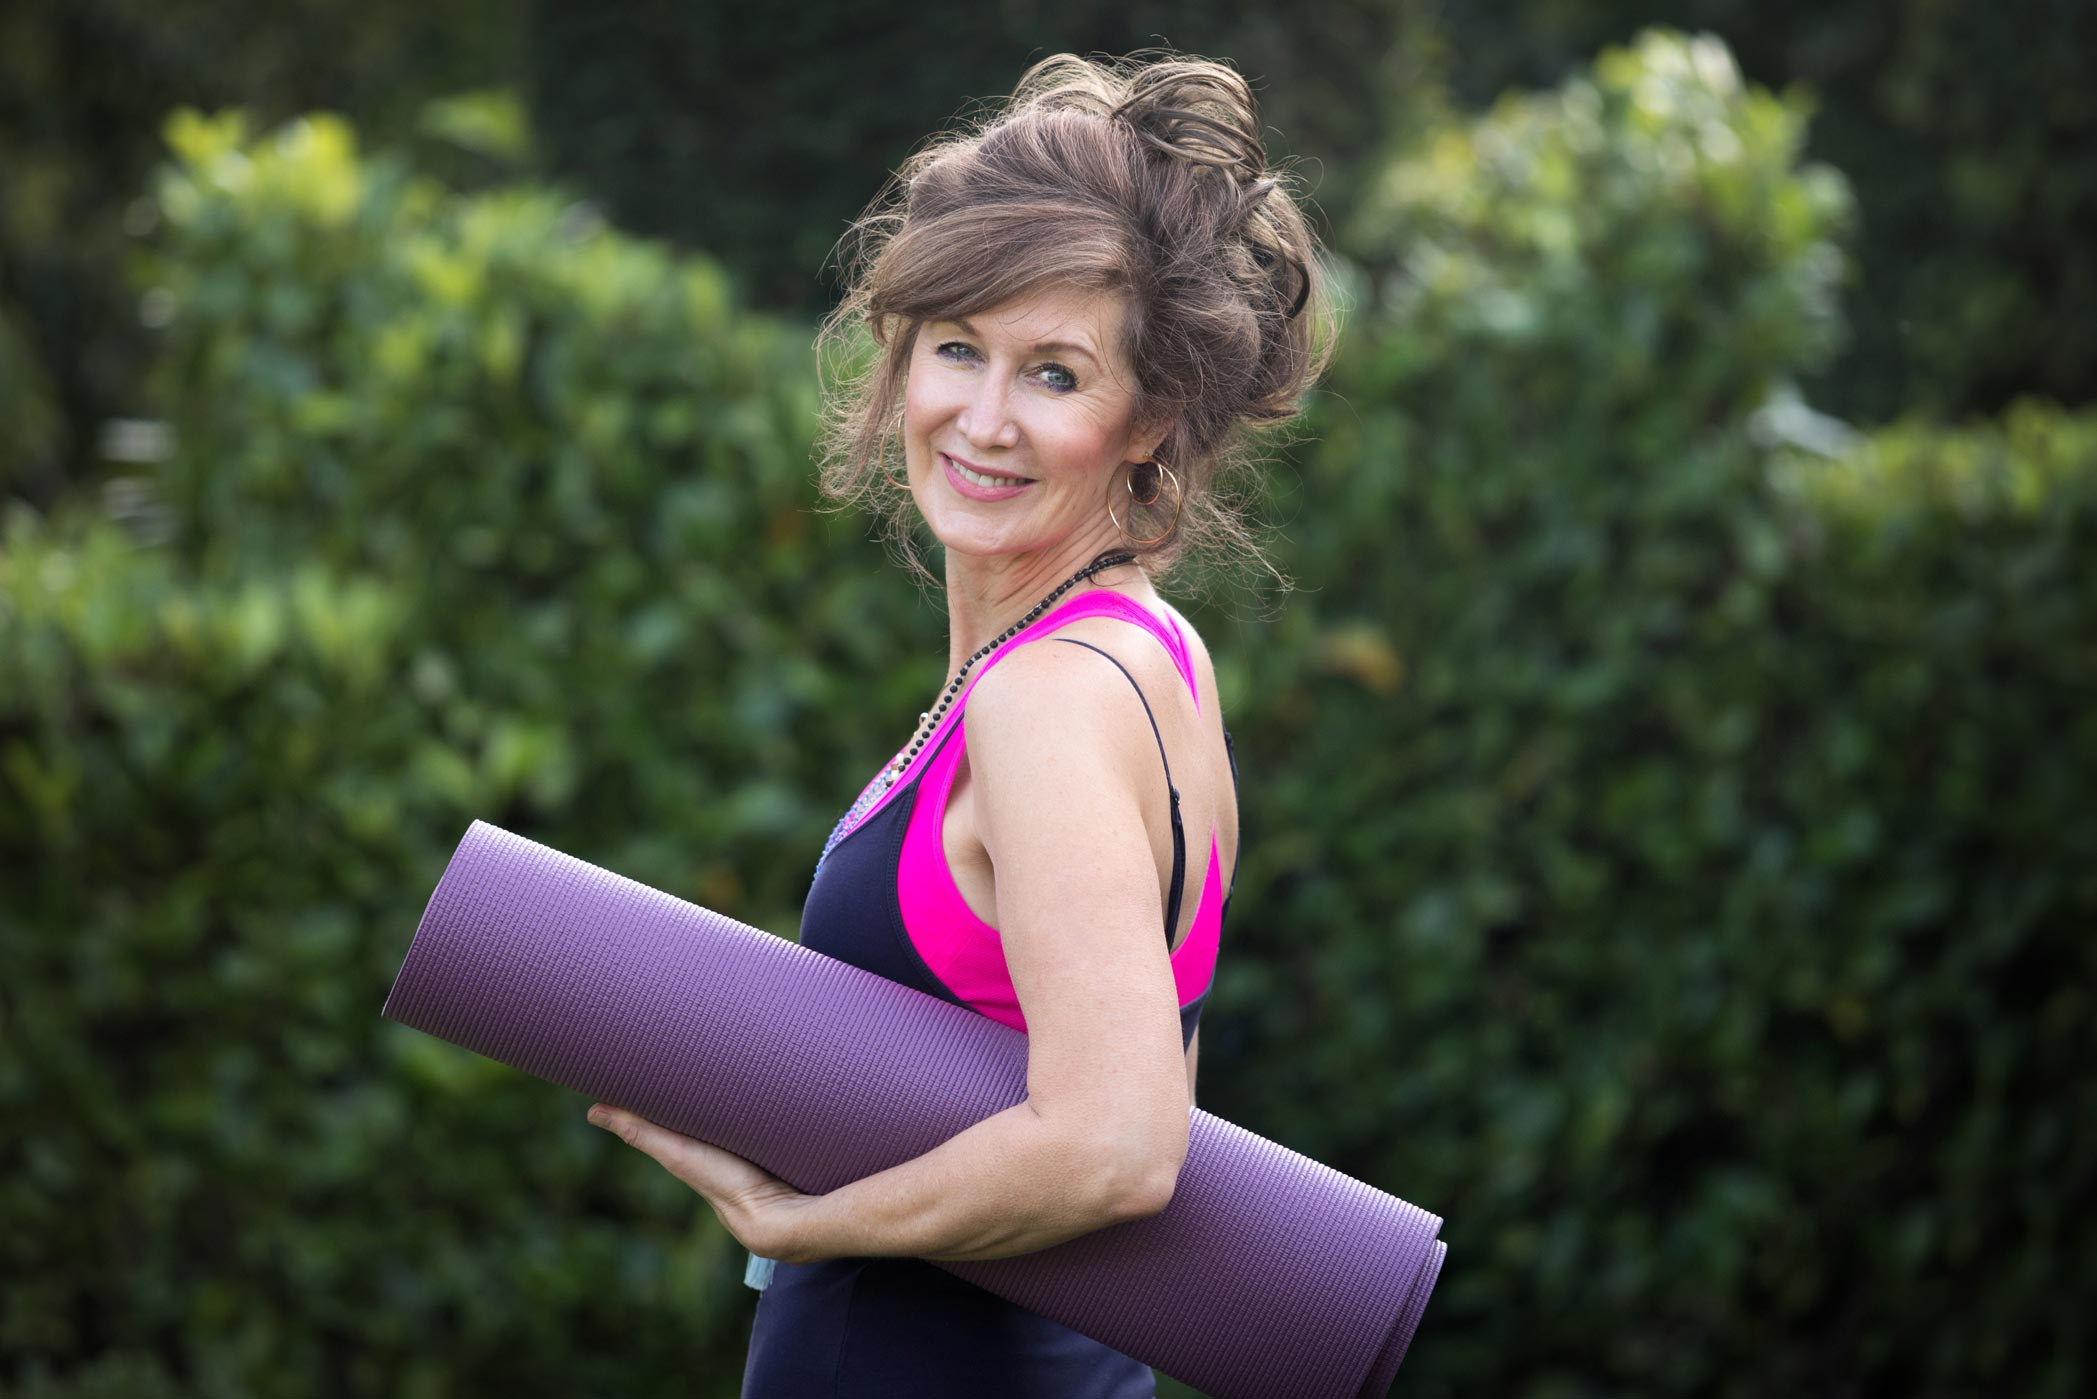 A female yoga teacher holds her mat for a photo as part of her health & fitness personal branding photography shoot in Croydon, London